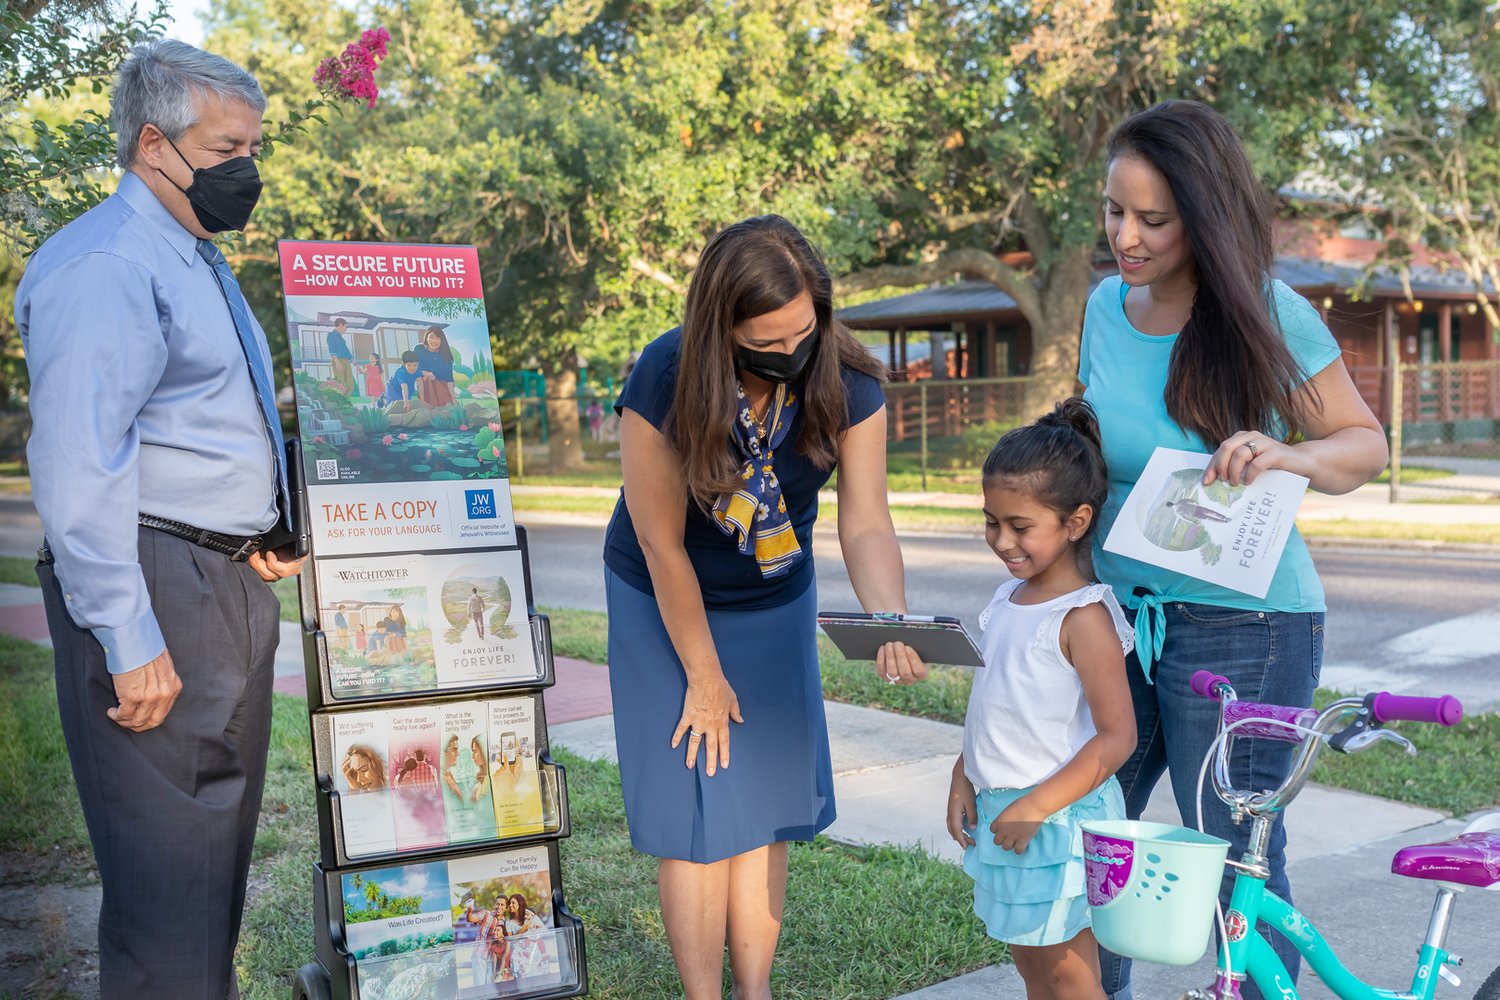 If you happen to be on the West Orange Trail near Kit Land Nelson Park this week, you may notice that a pre-pandemic fixture is back on the sidewalks: smiling faces standing next to colorful carts featuring a positive message and free Bible-based literature. 